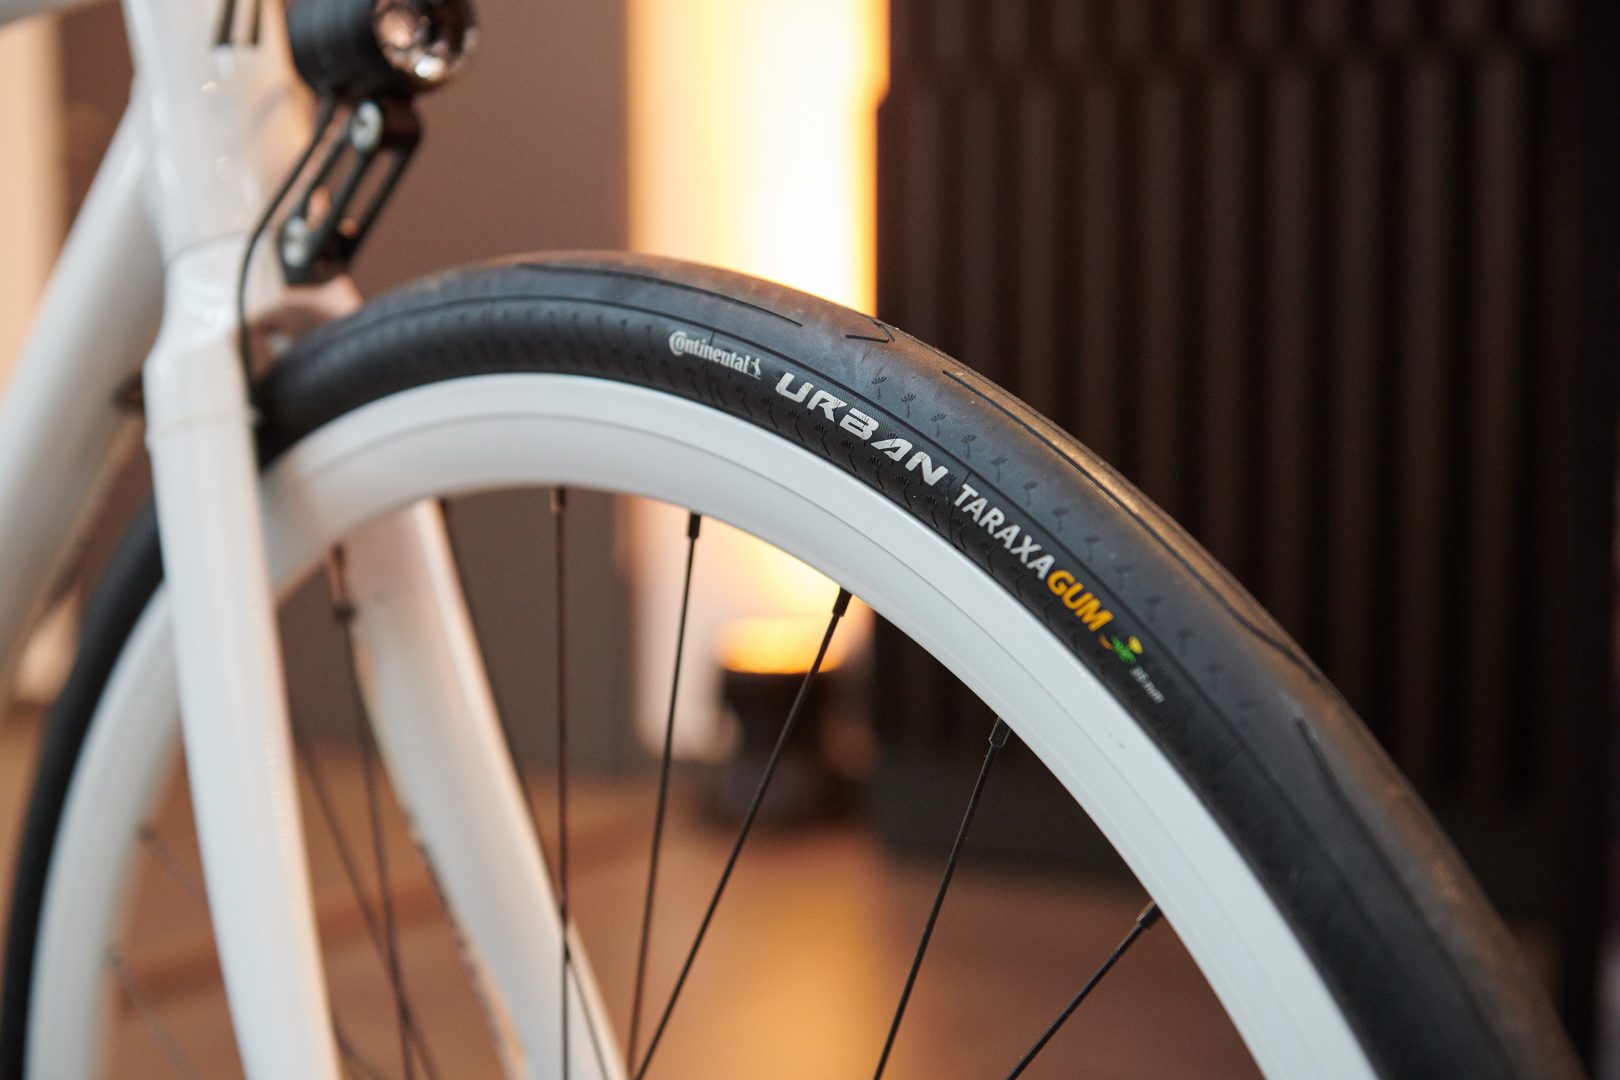 https://www.cyclingweekly.com/news/product-news/continental-launches-bike-tyre-made-dandelions-424634